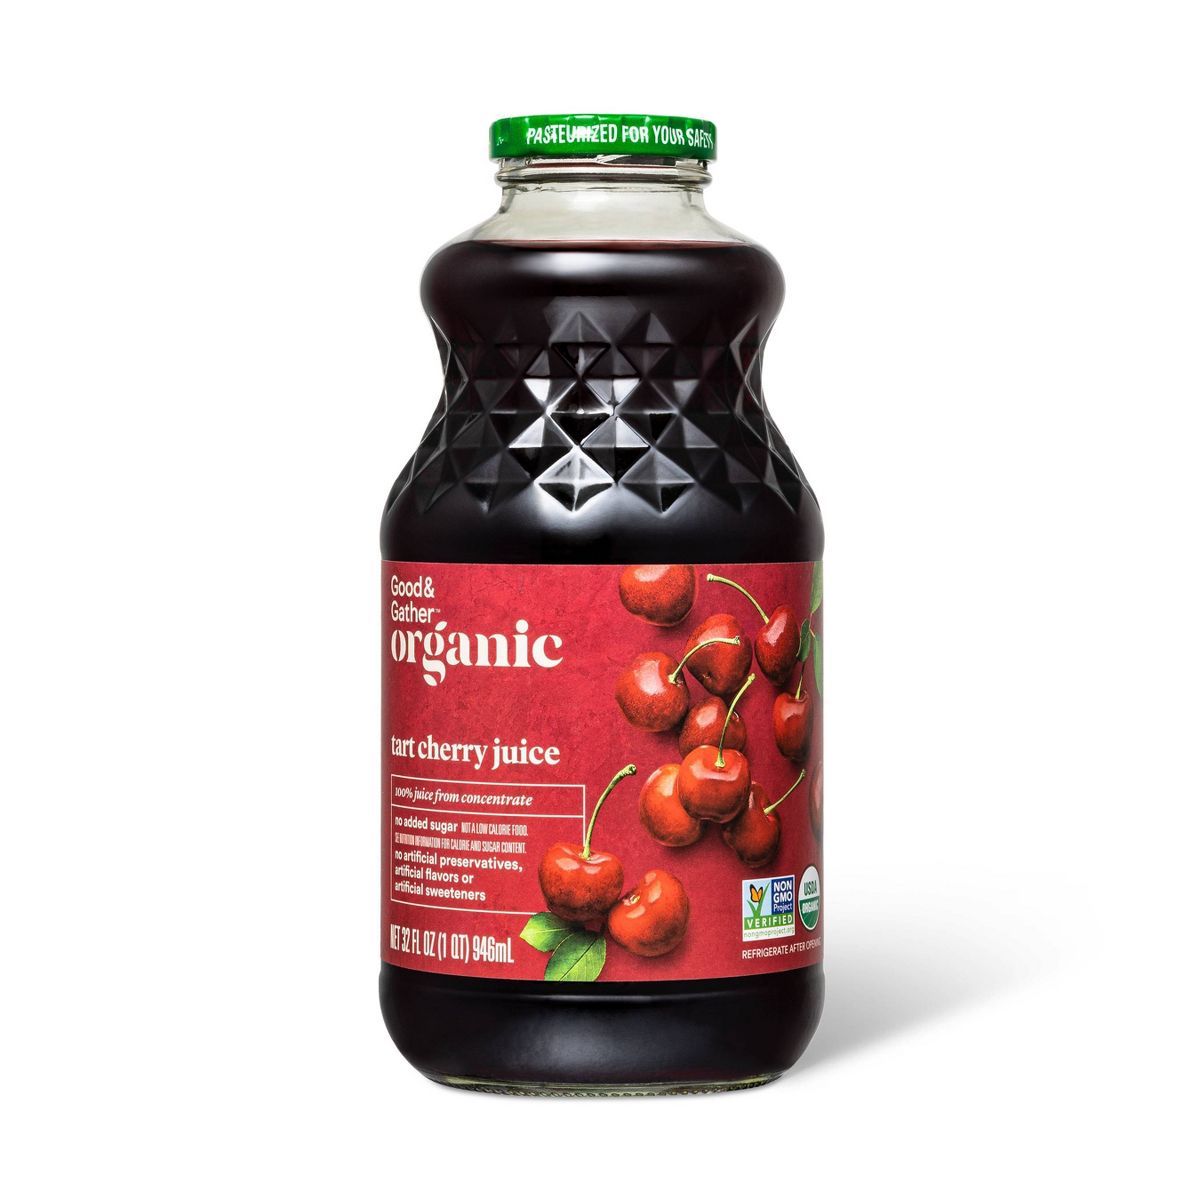 Organic Tart Cherry Juice From Concentrate - 32 fl oz - Good & Gather™ | Target